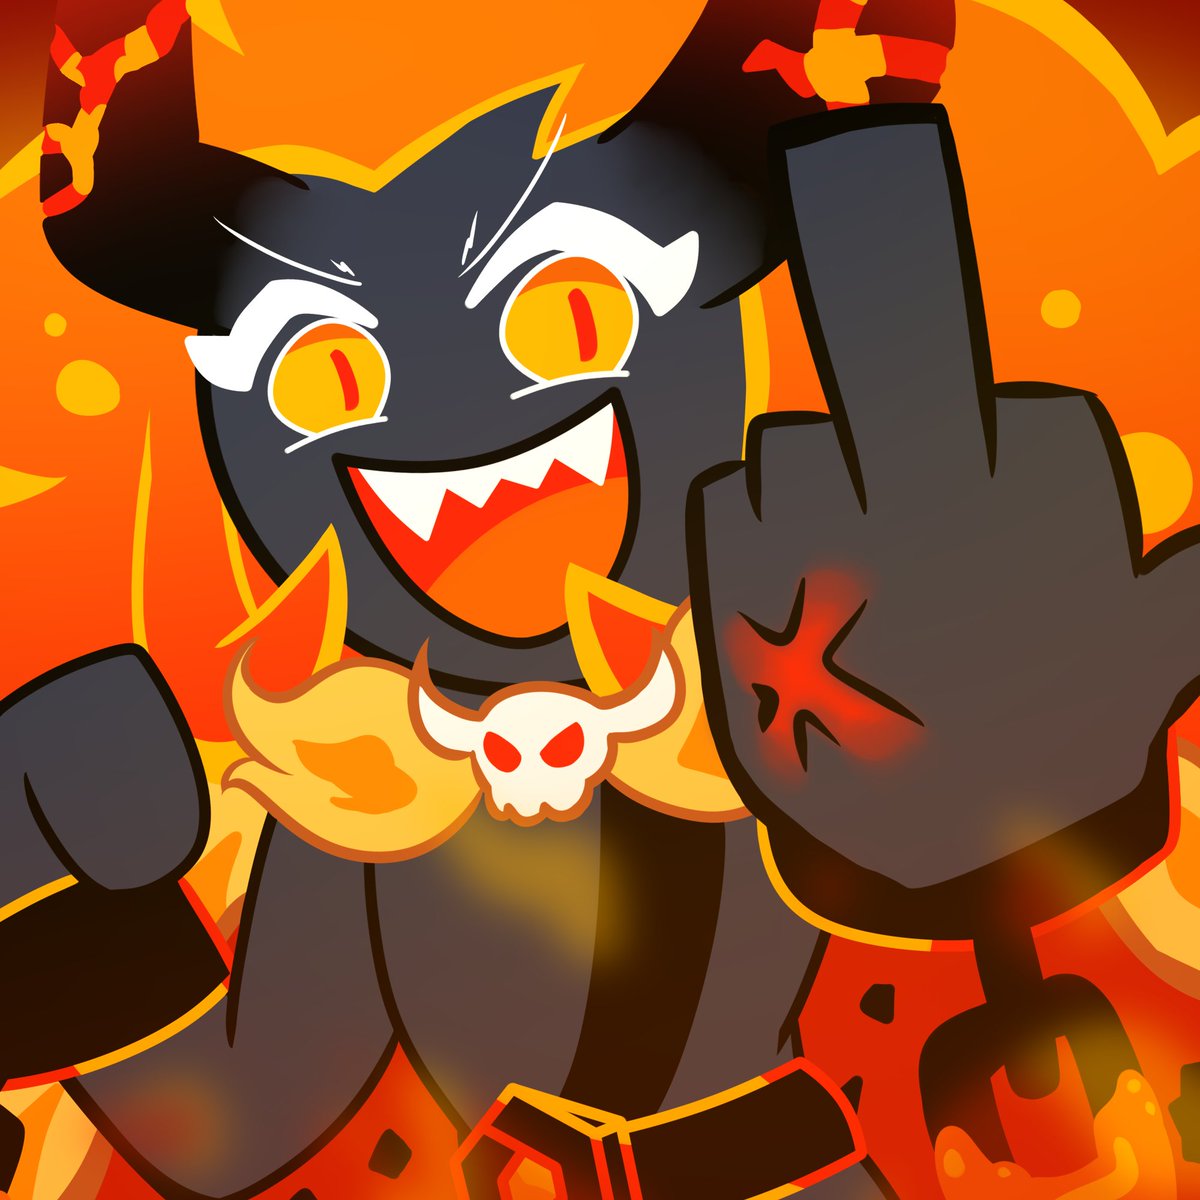 Capsaicin Cookie is very spicy!
Of course, he is the spice overlord
#cookierun #cookierunkingdom